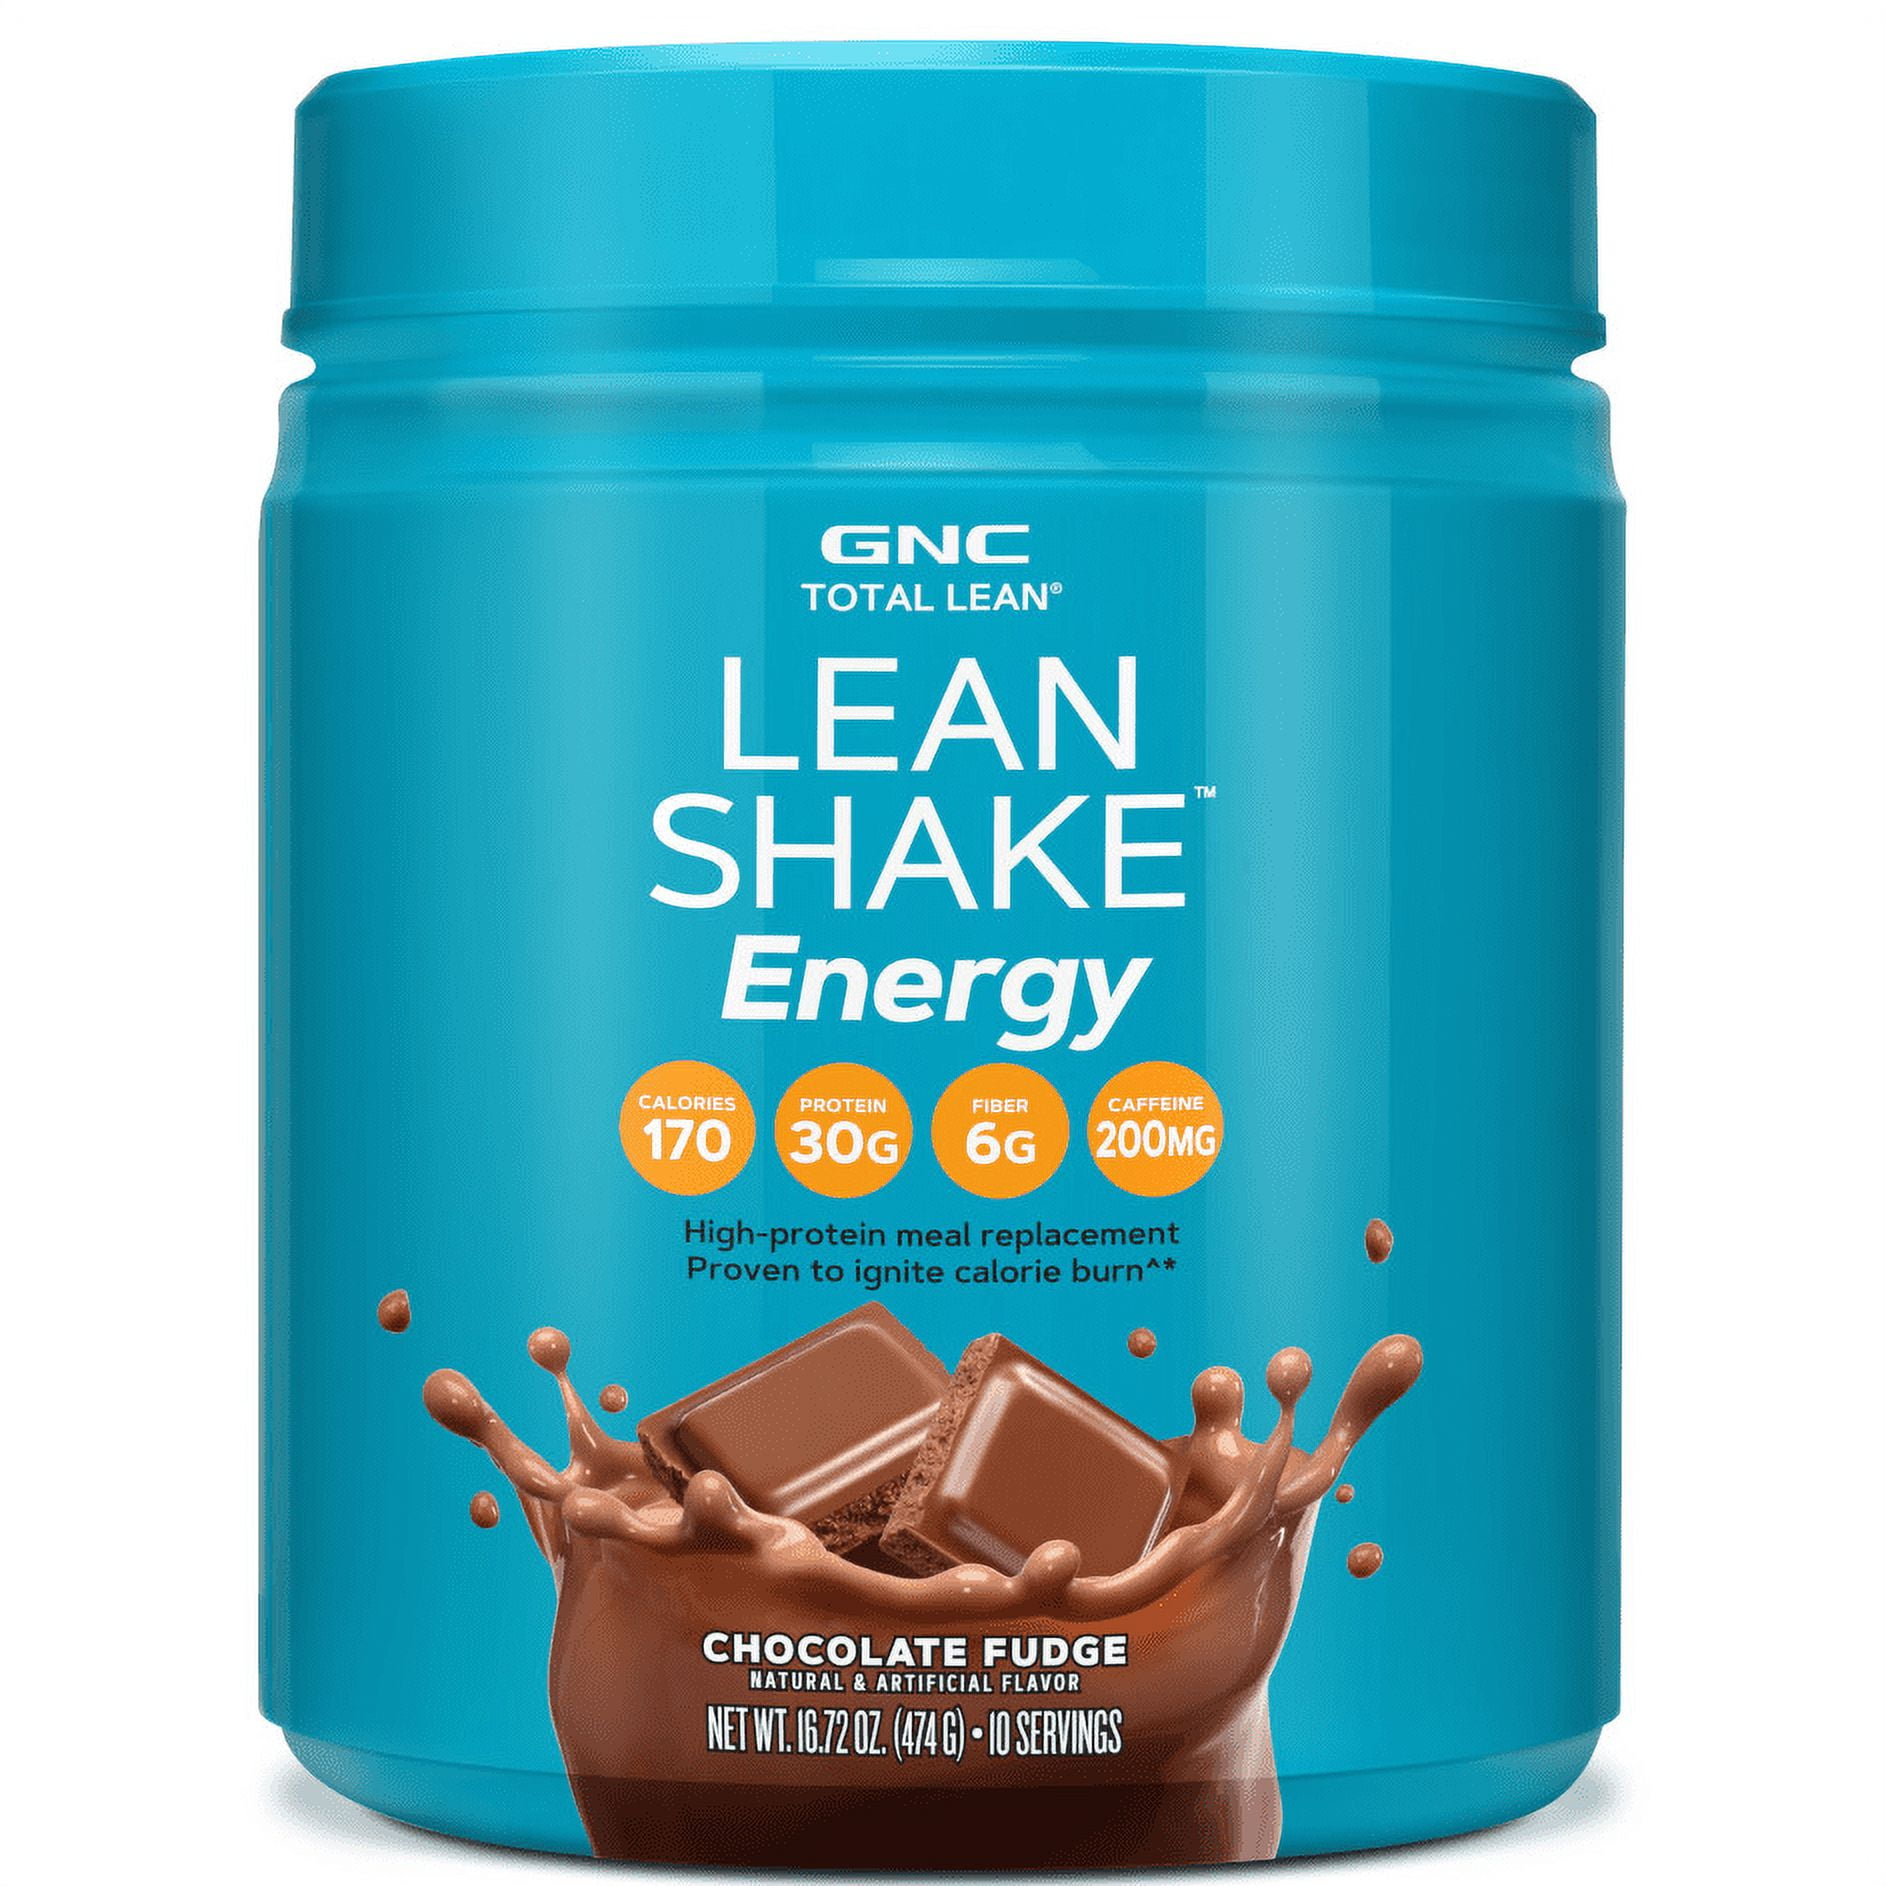 North Hills GNC - The new GNC Total Lean® Lean Shake with Slimvance® is  here! This high protein shake will help satisfy hunger , improve digestive  comfort & bloating, is fortified with